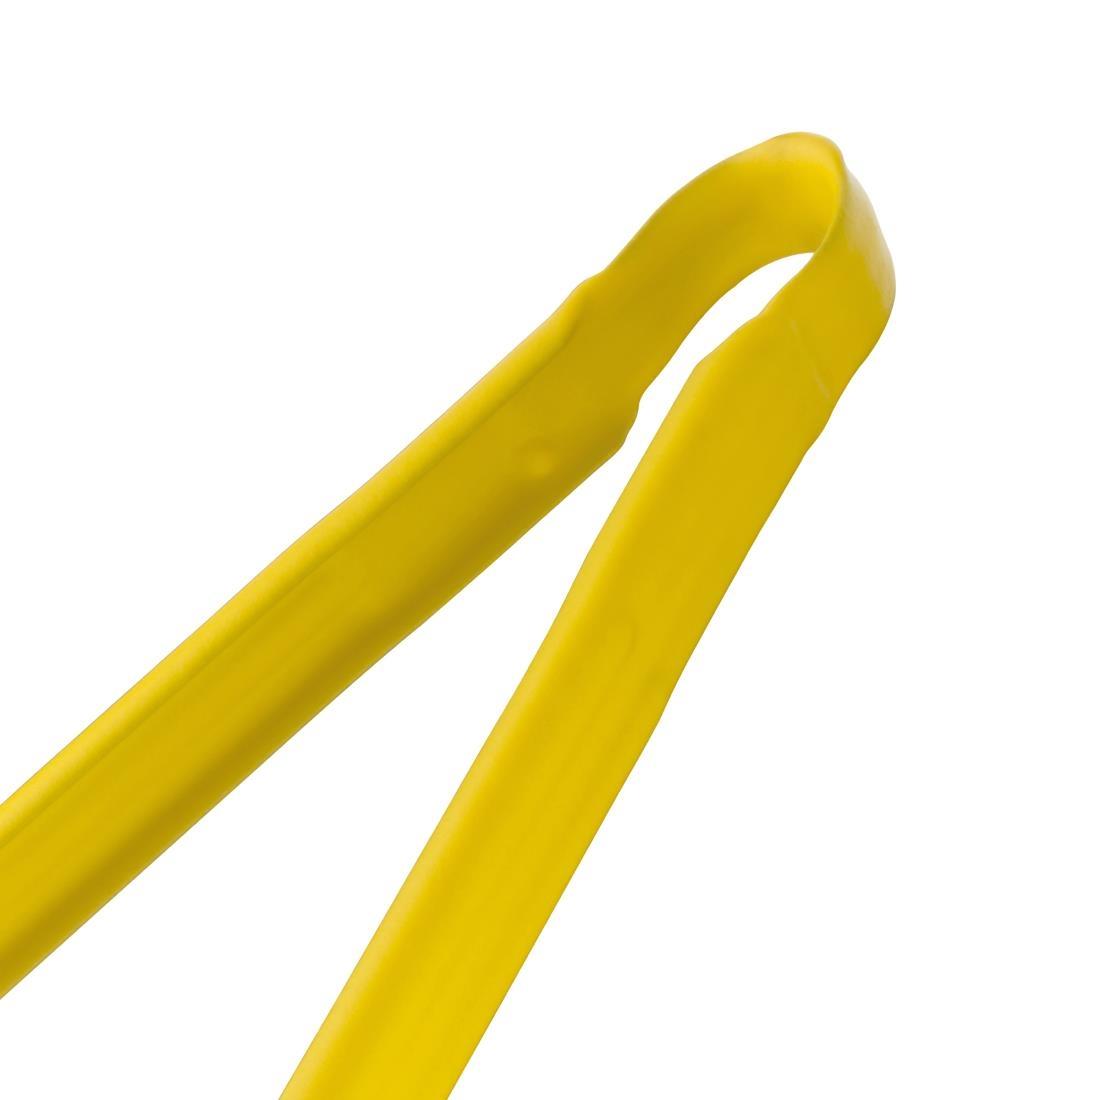 Hygiplas Colour Coded Serving Tong Yellow 405mm - HC855  - 4